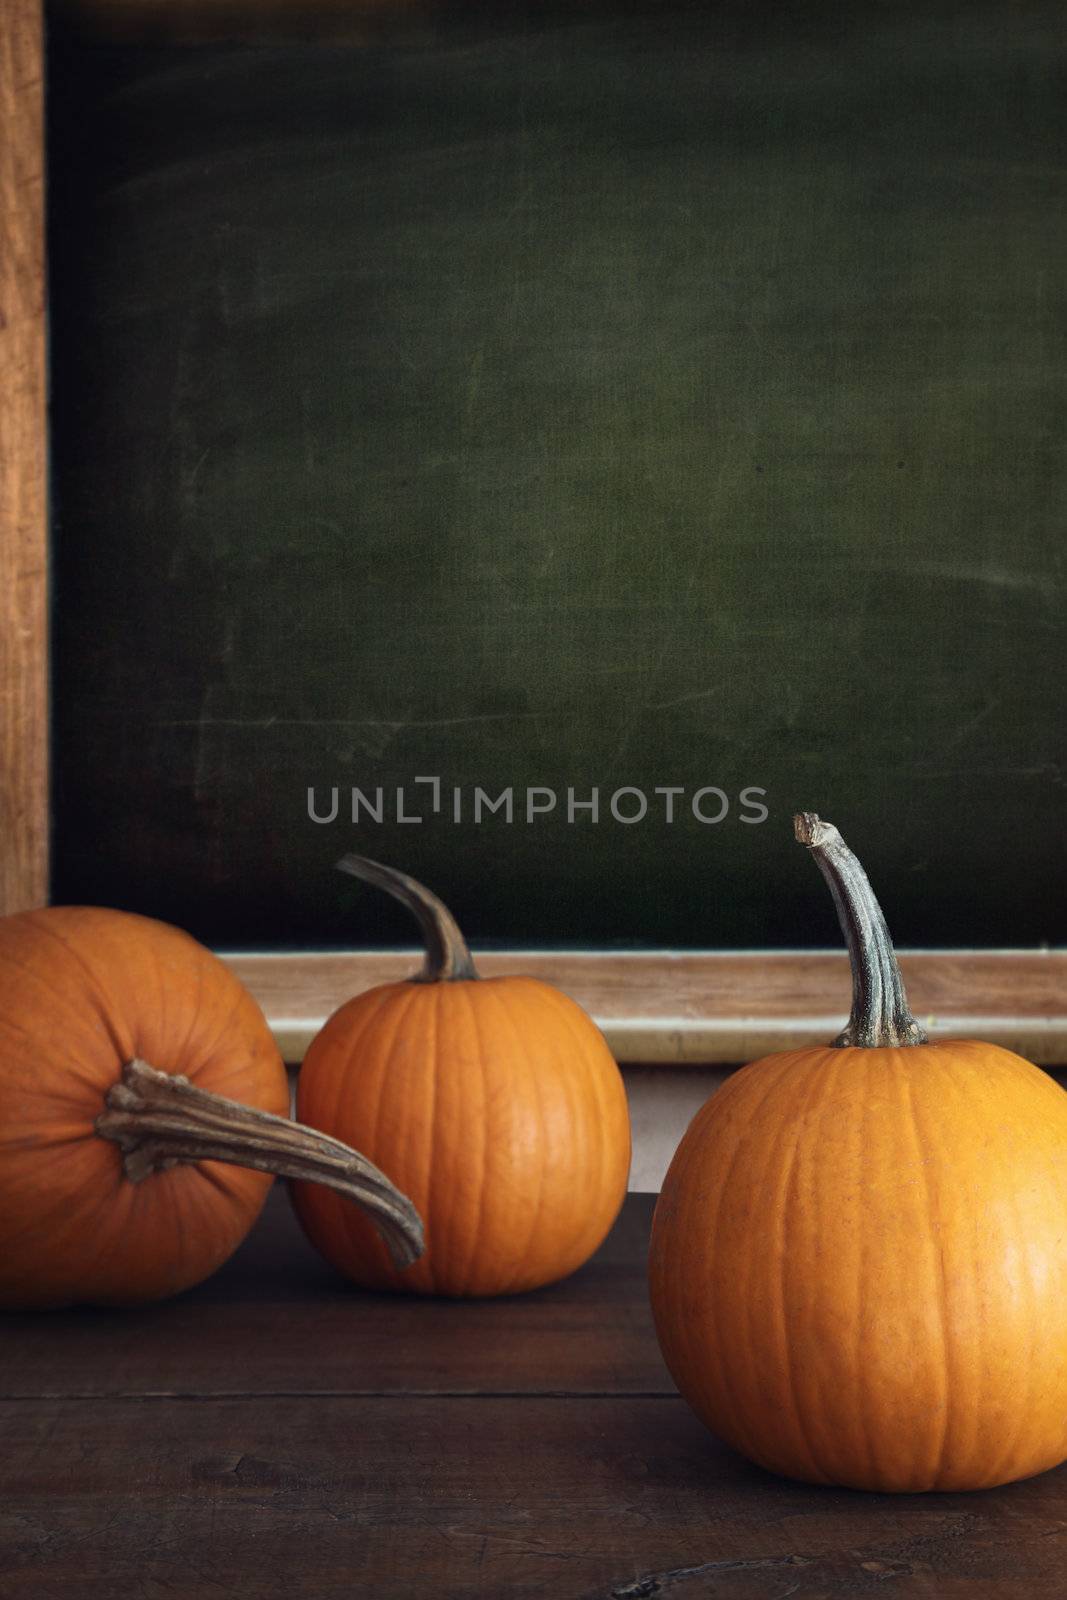 Pumpkins on table with menu board in background